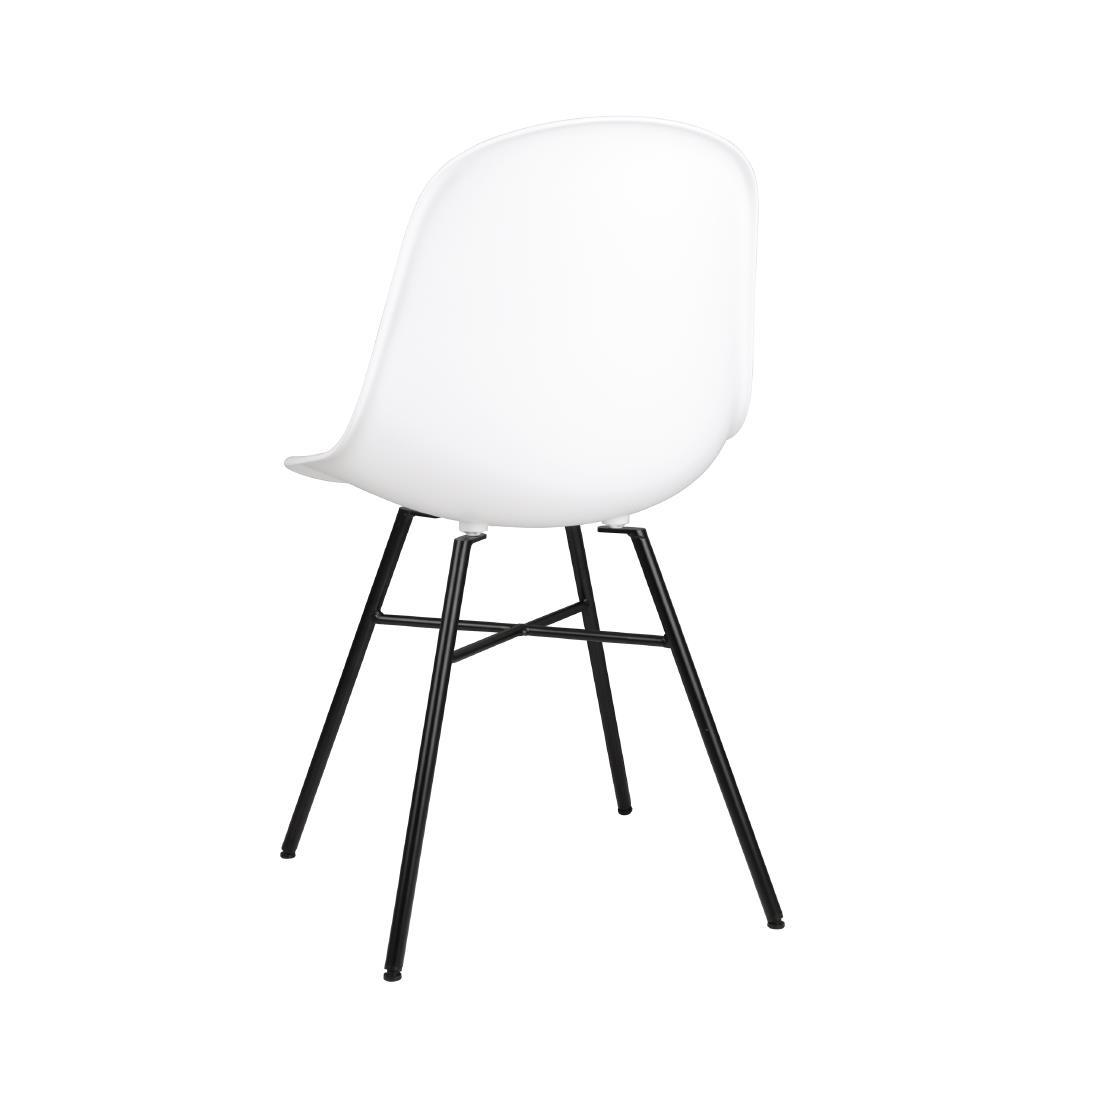 Bolero Arlo Side Chairs with Metal Frame White (Pack of 2) - DY348  - 3